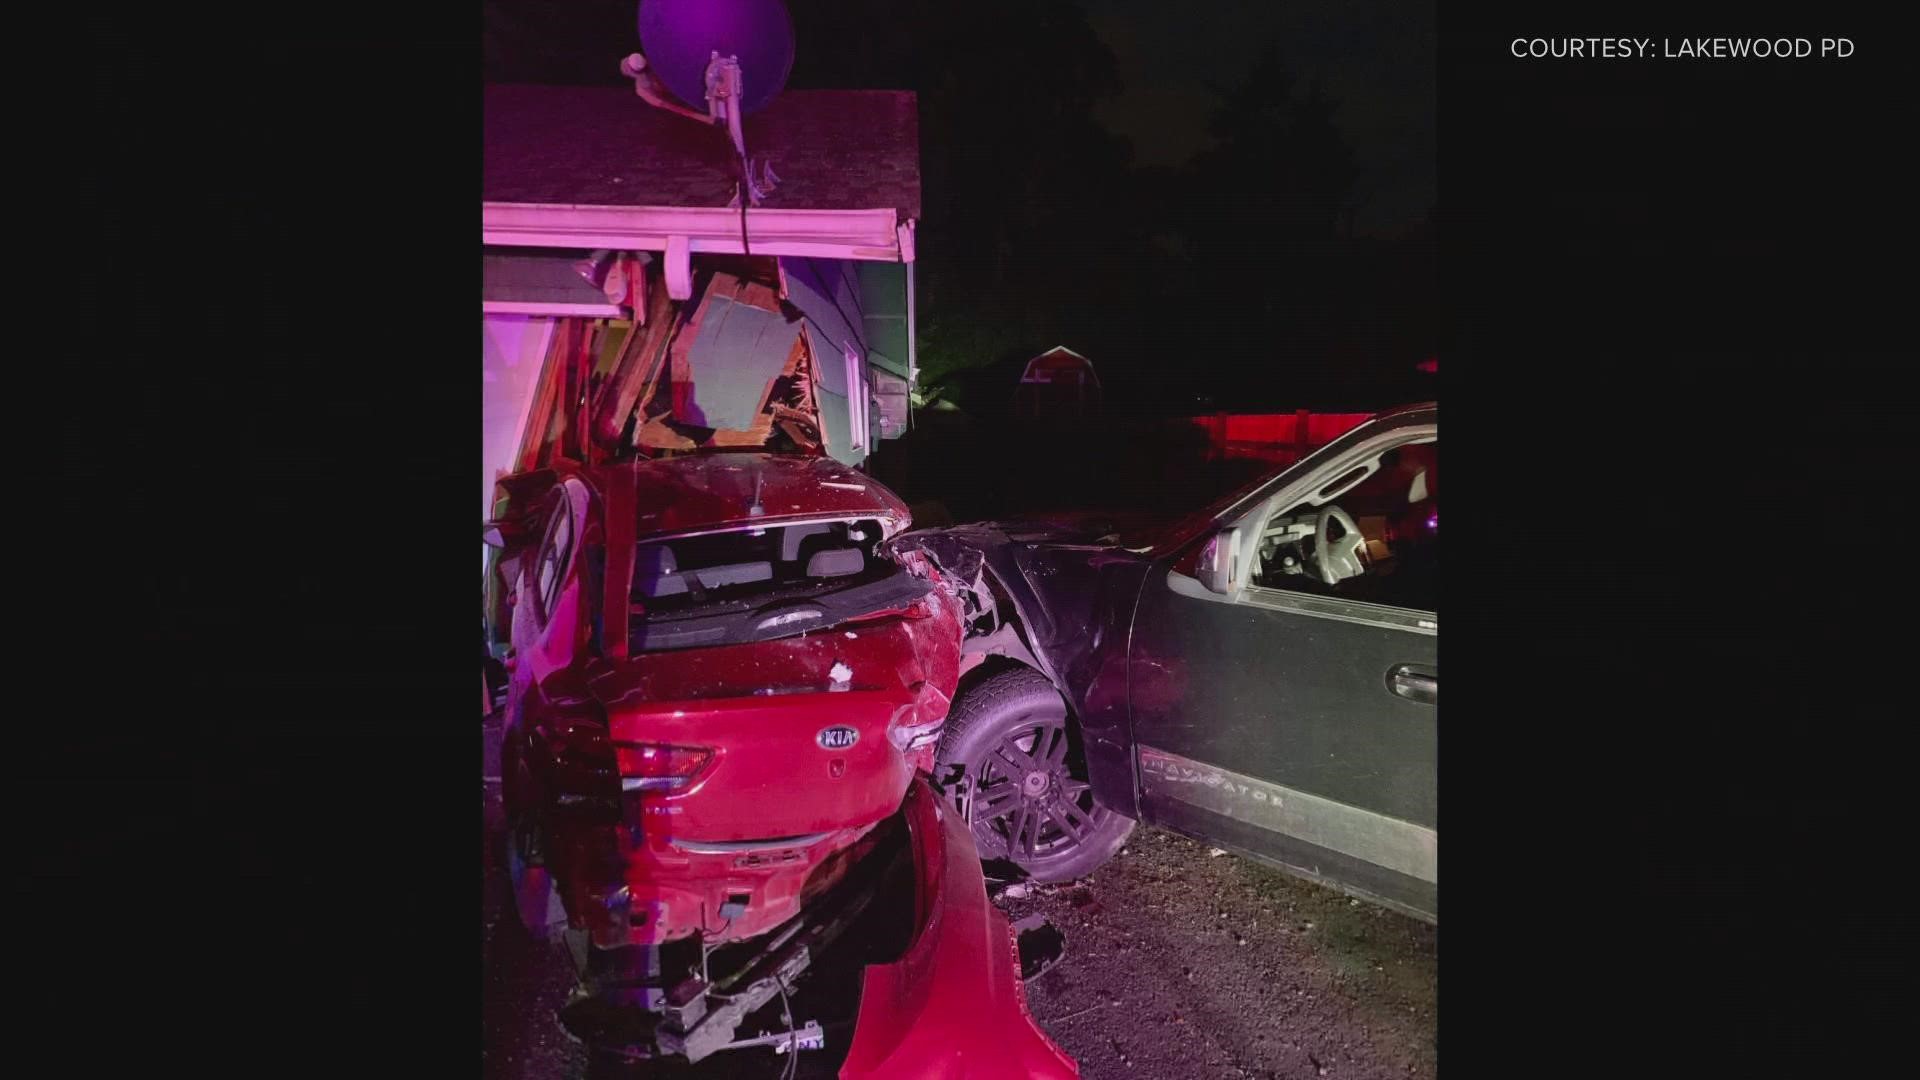 A 38-year-old man was booked into the Pierce County Jail on multiple felony charges after they rammed an SUV into multiple vehicles during a pursuit Wednesday night.